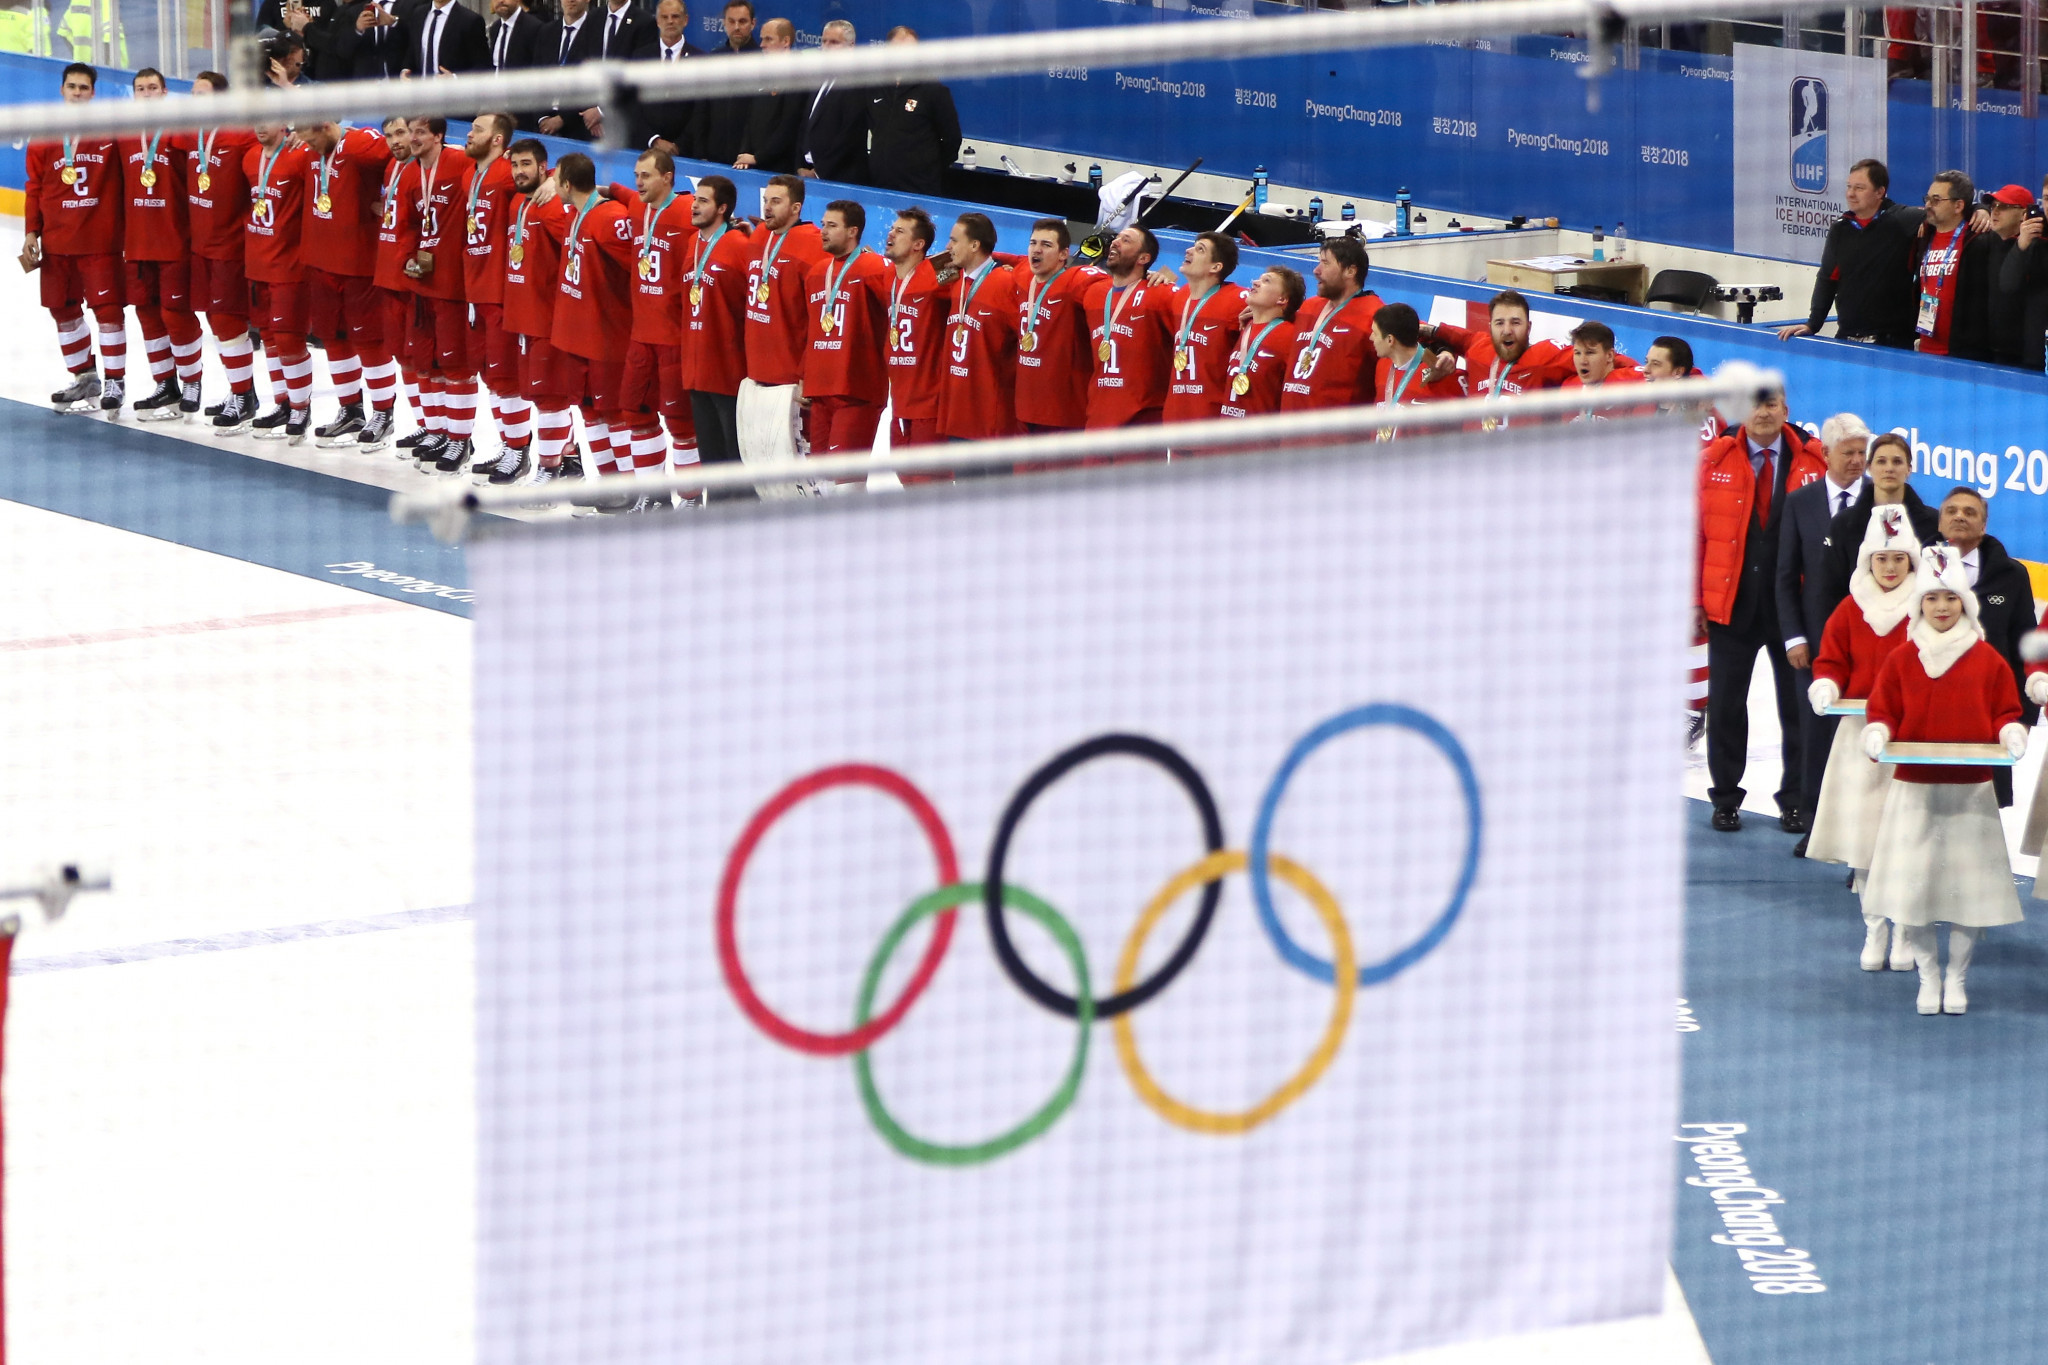 Russia had to compete under the Olympic flag at Pyeongchang 2018 and will have to do the same at Tokyo 2020 if the recommendations of the WADA Compliance Review Committee are accepted ©Getty Images